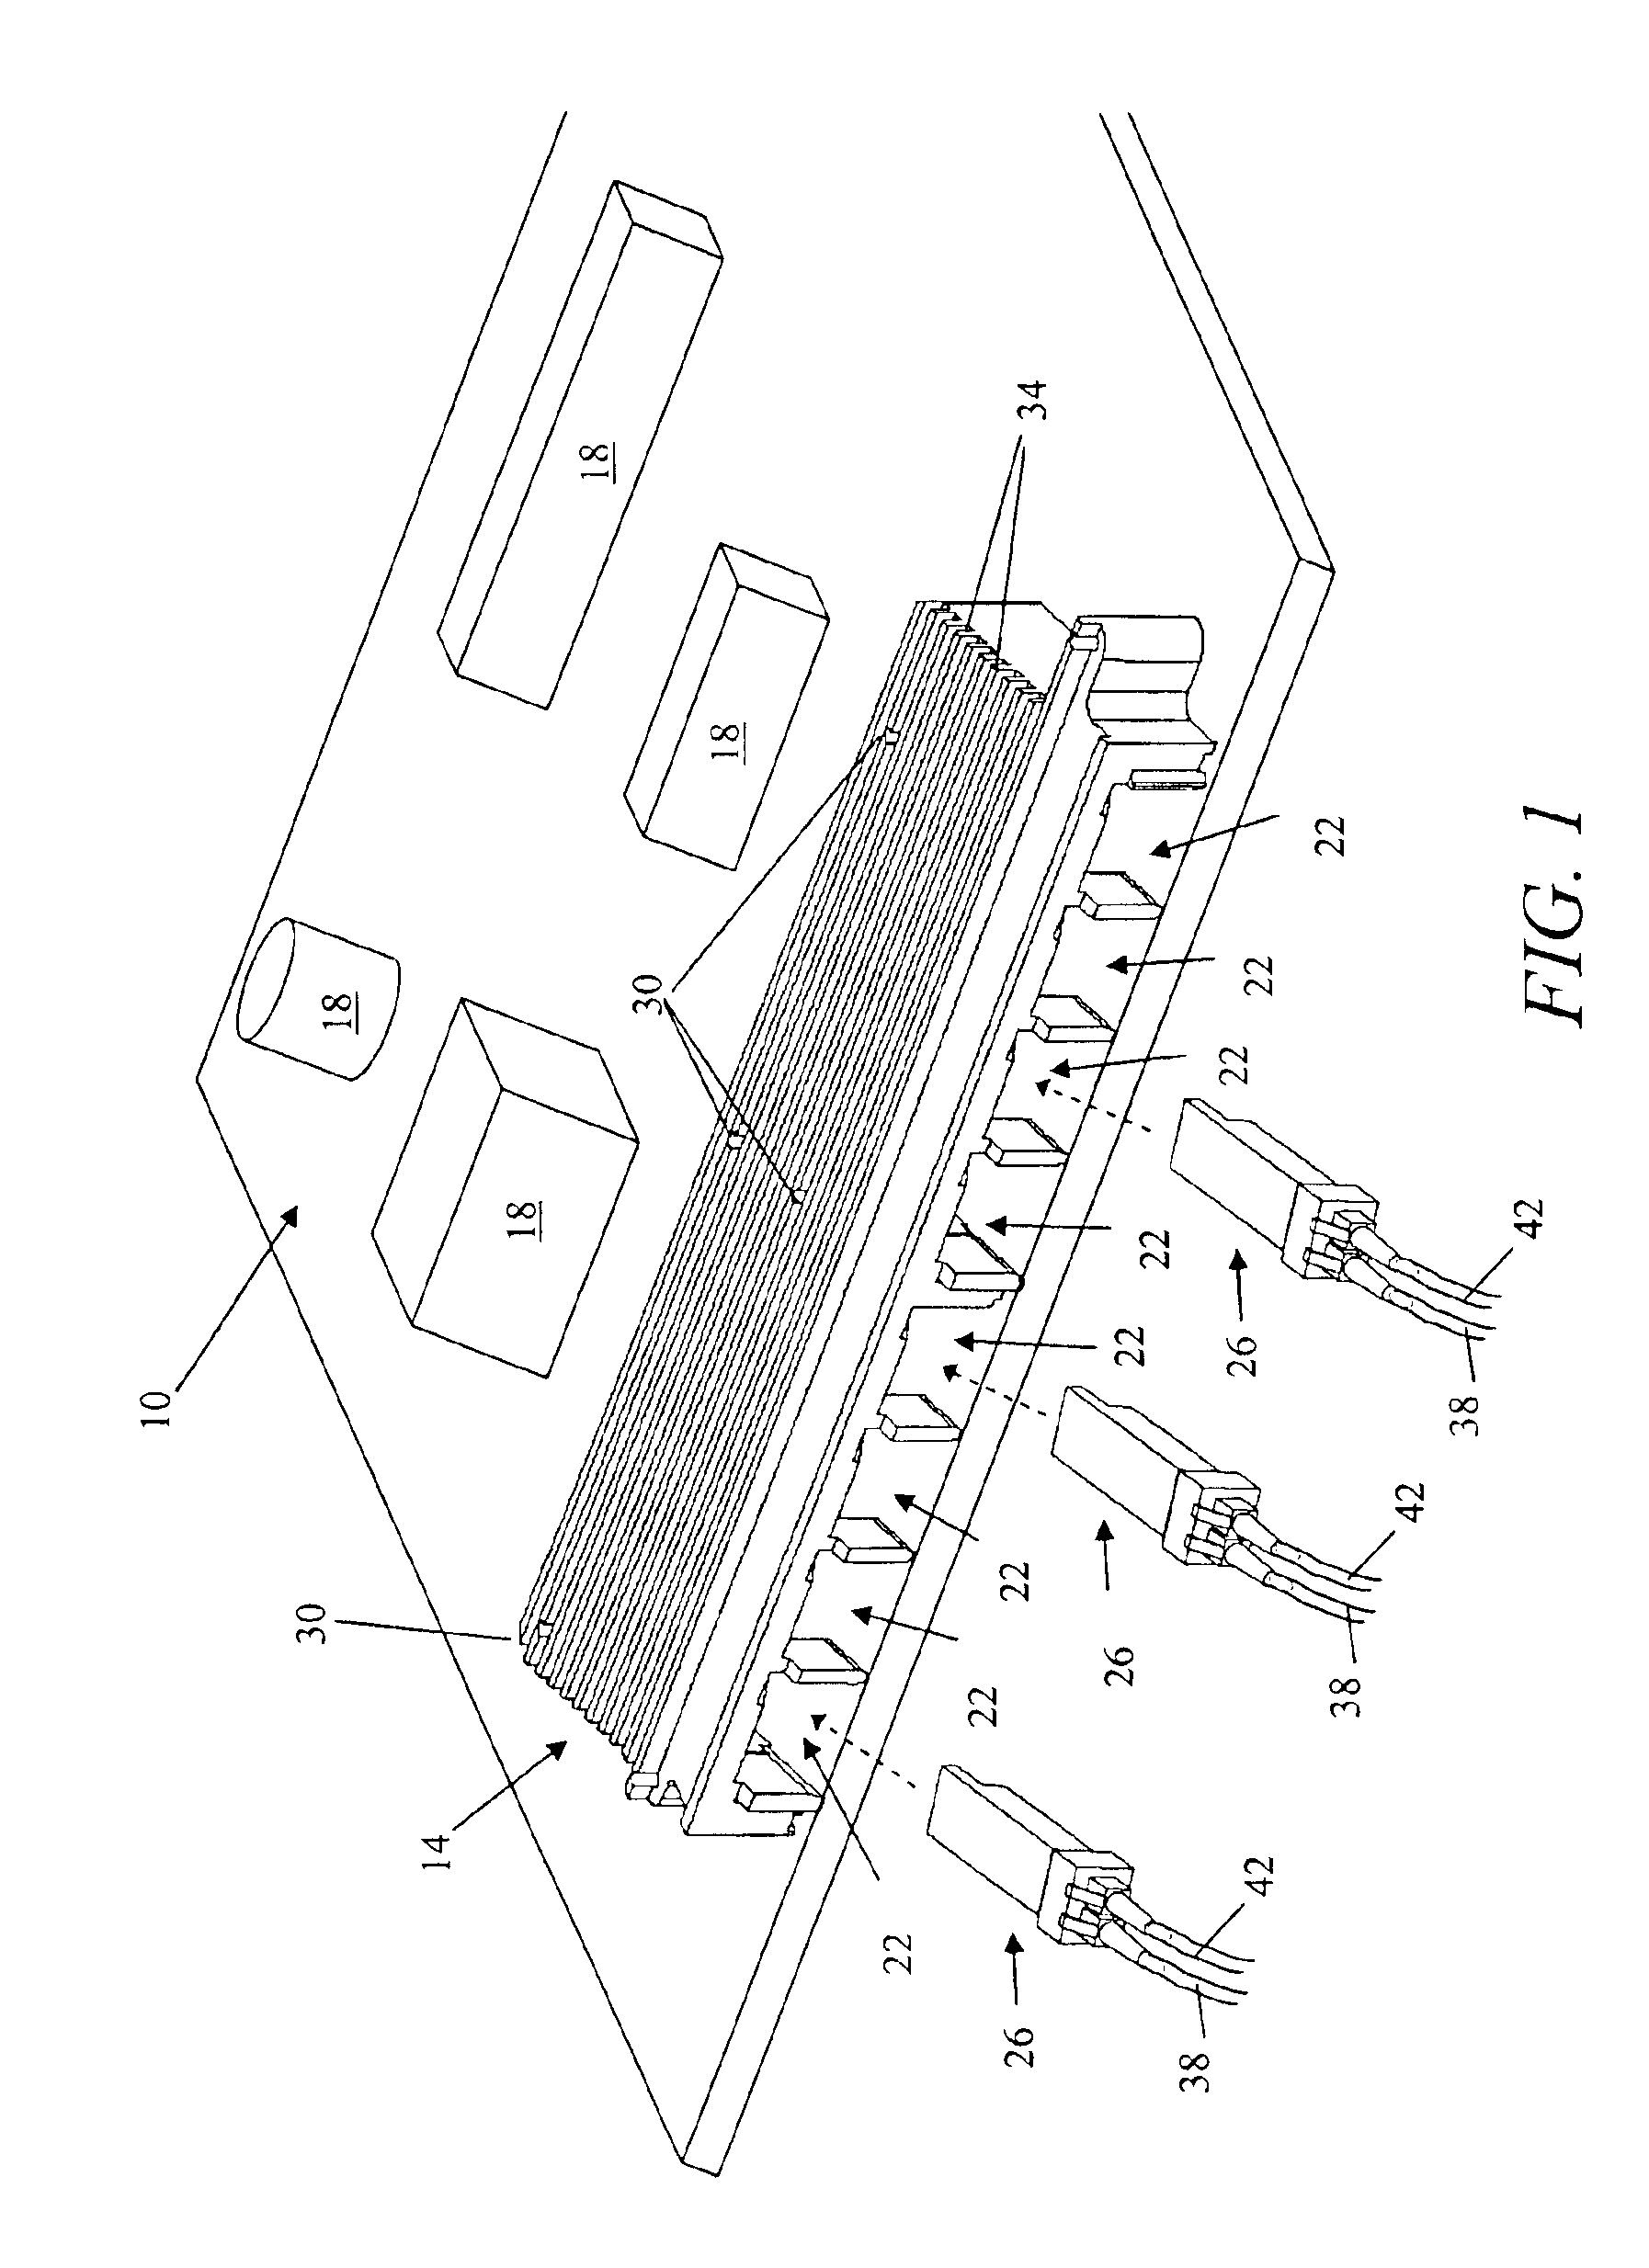 Electromagnetic compliant shield having electrostatic discharge protection